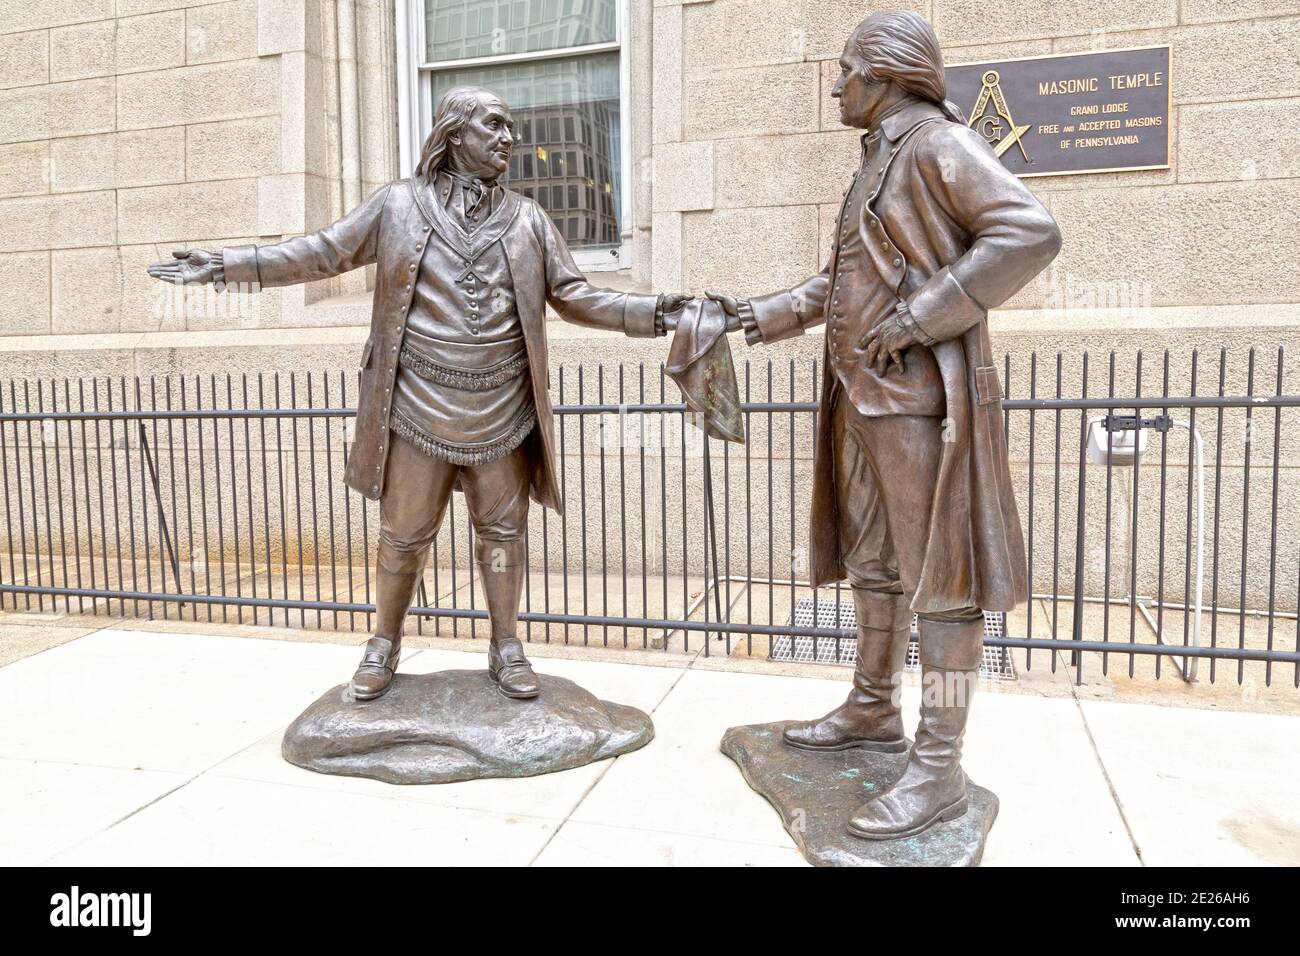 Statue depicting Benjamin Franklin and George Washington outside of the Masonic Museum and Library in Philadelphia, USA. Stock Photo